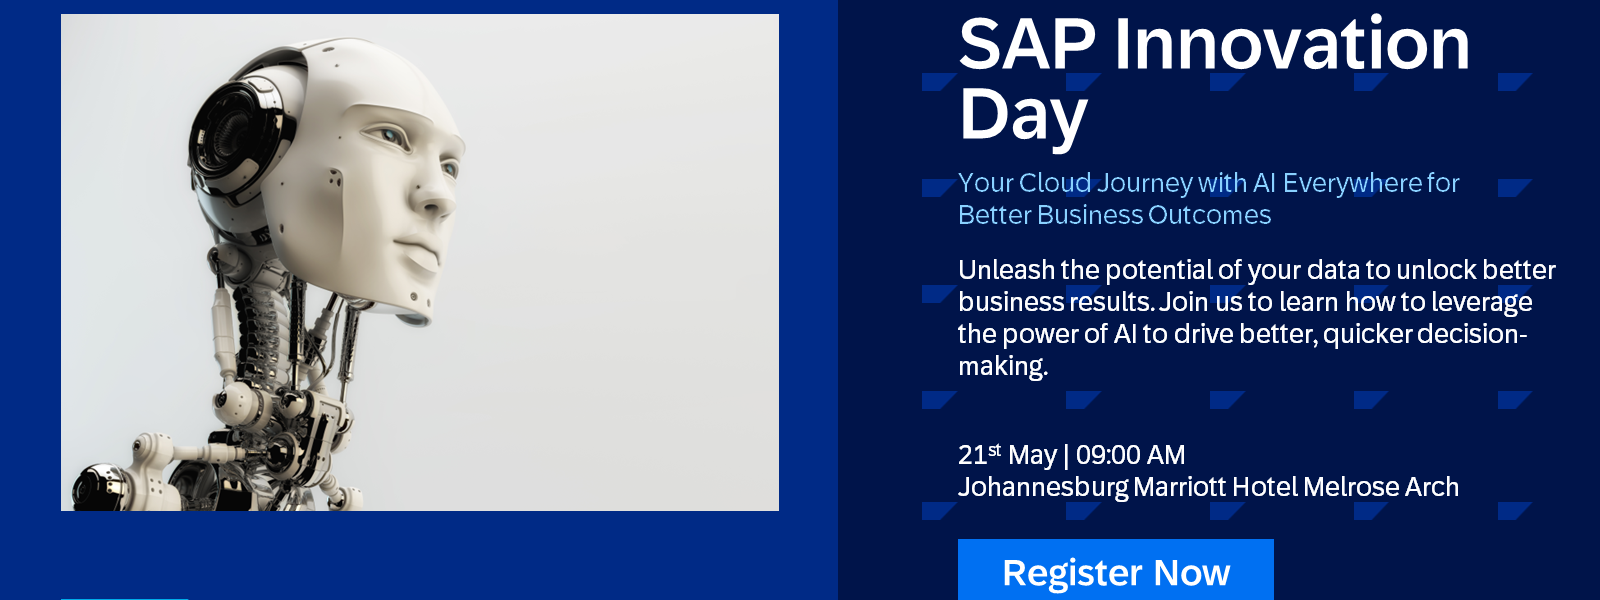 SAP Innovation Day: Your Cloud Journey with AI Everywhere for Better Business Outcomes